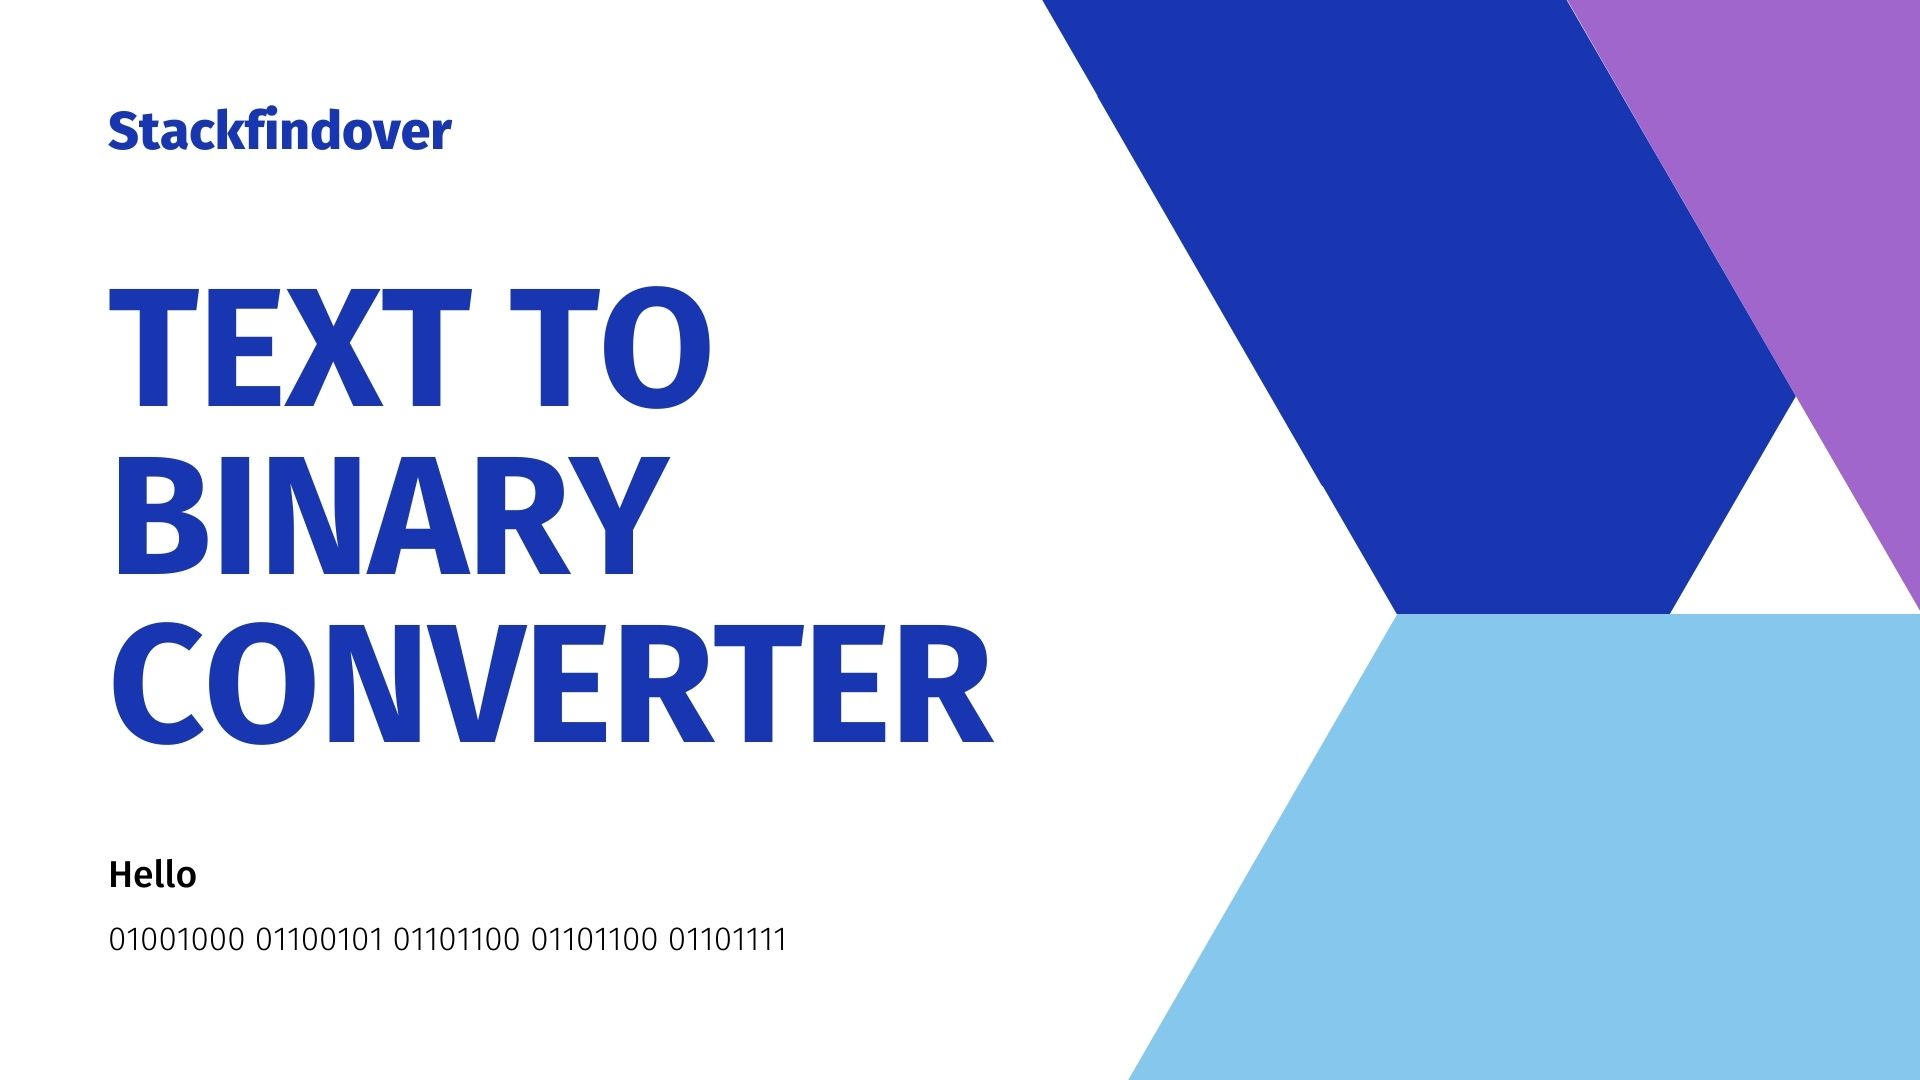 Text-to-binary converter